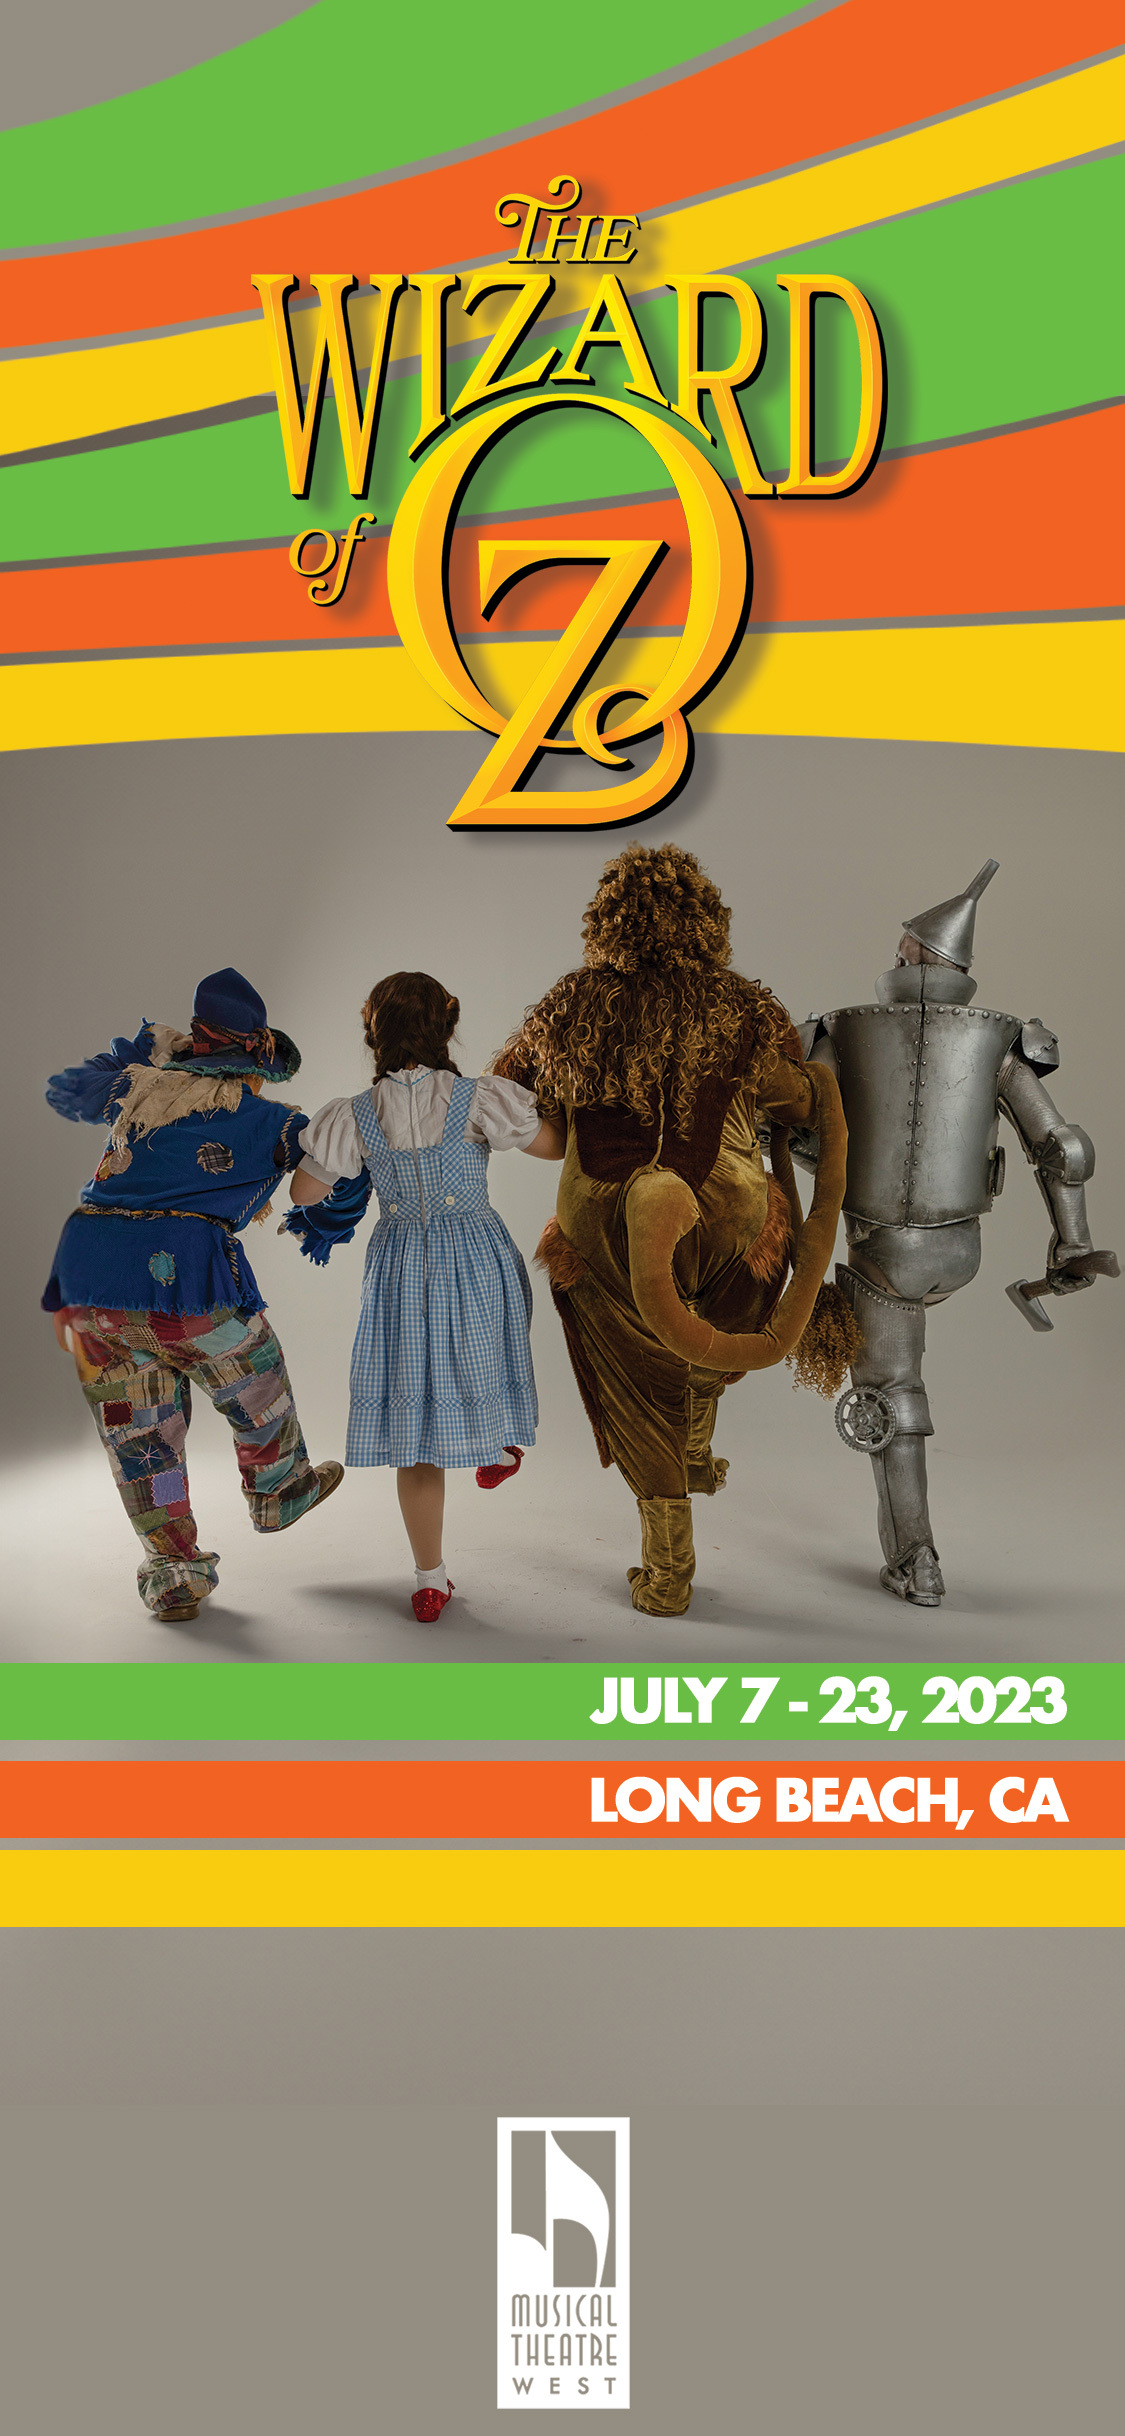 The Wizard of Oz Tickets, Long Beach